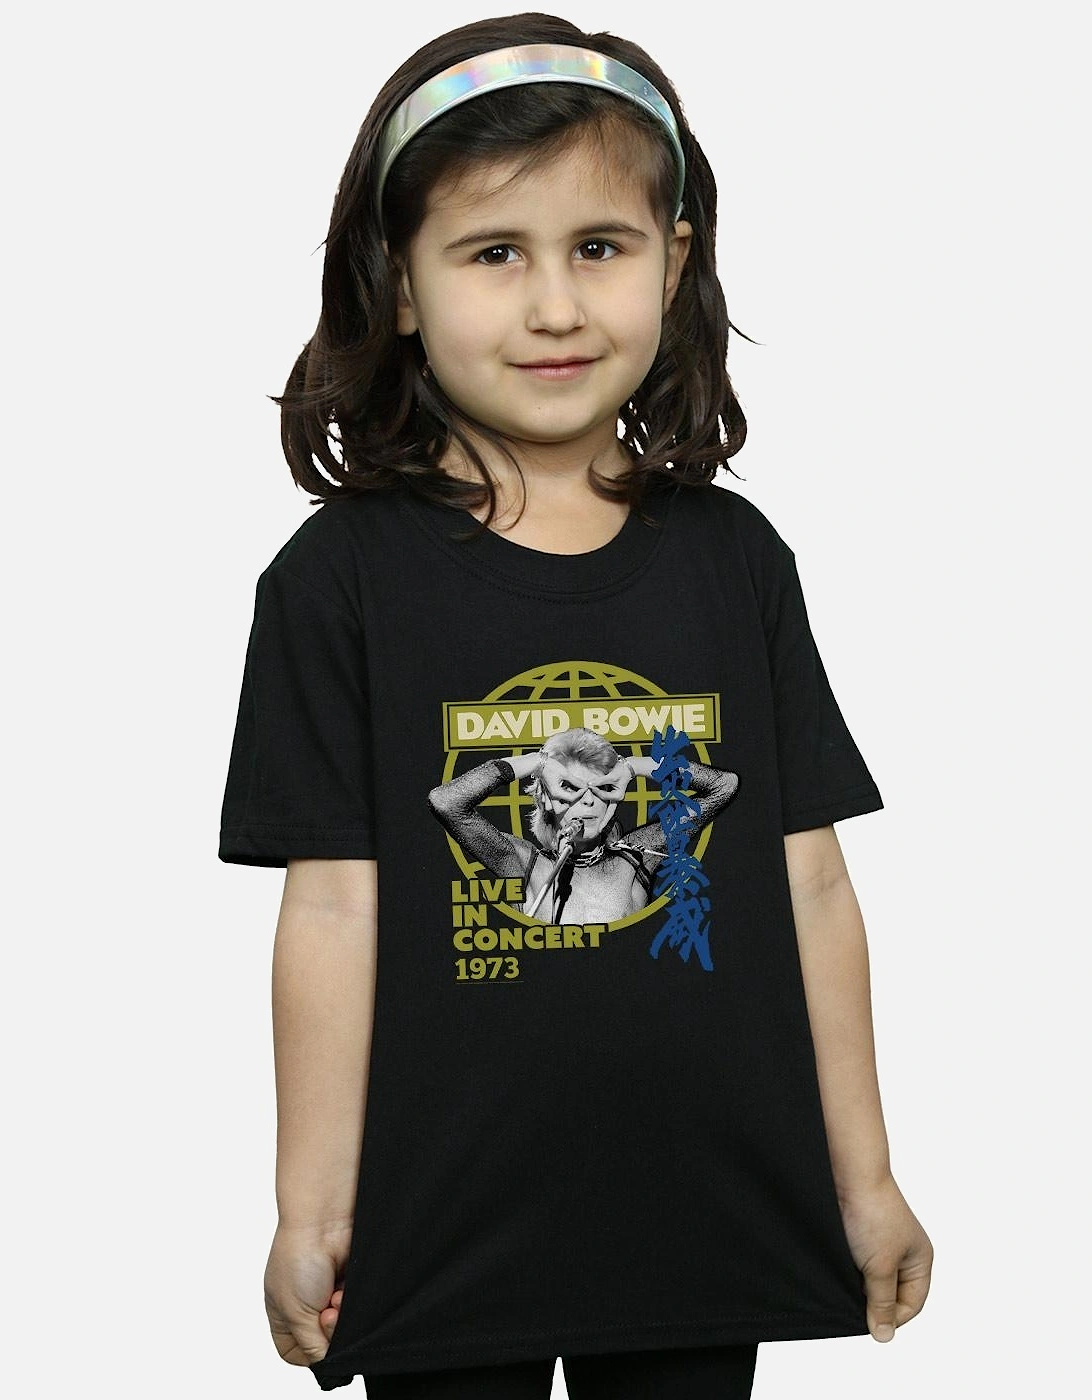 Girls Live In Concert Cotton T-Shirt